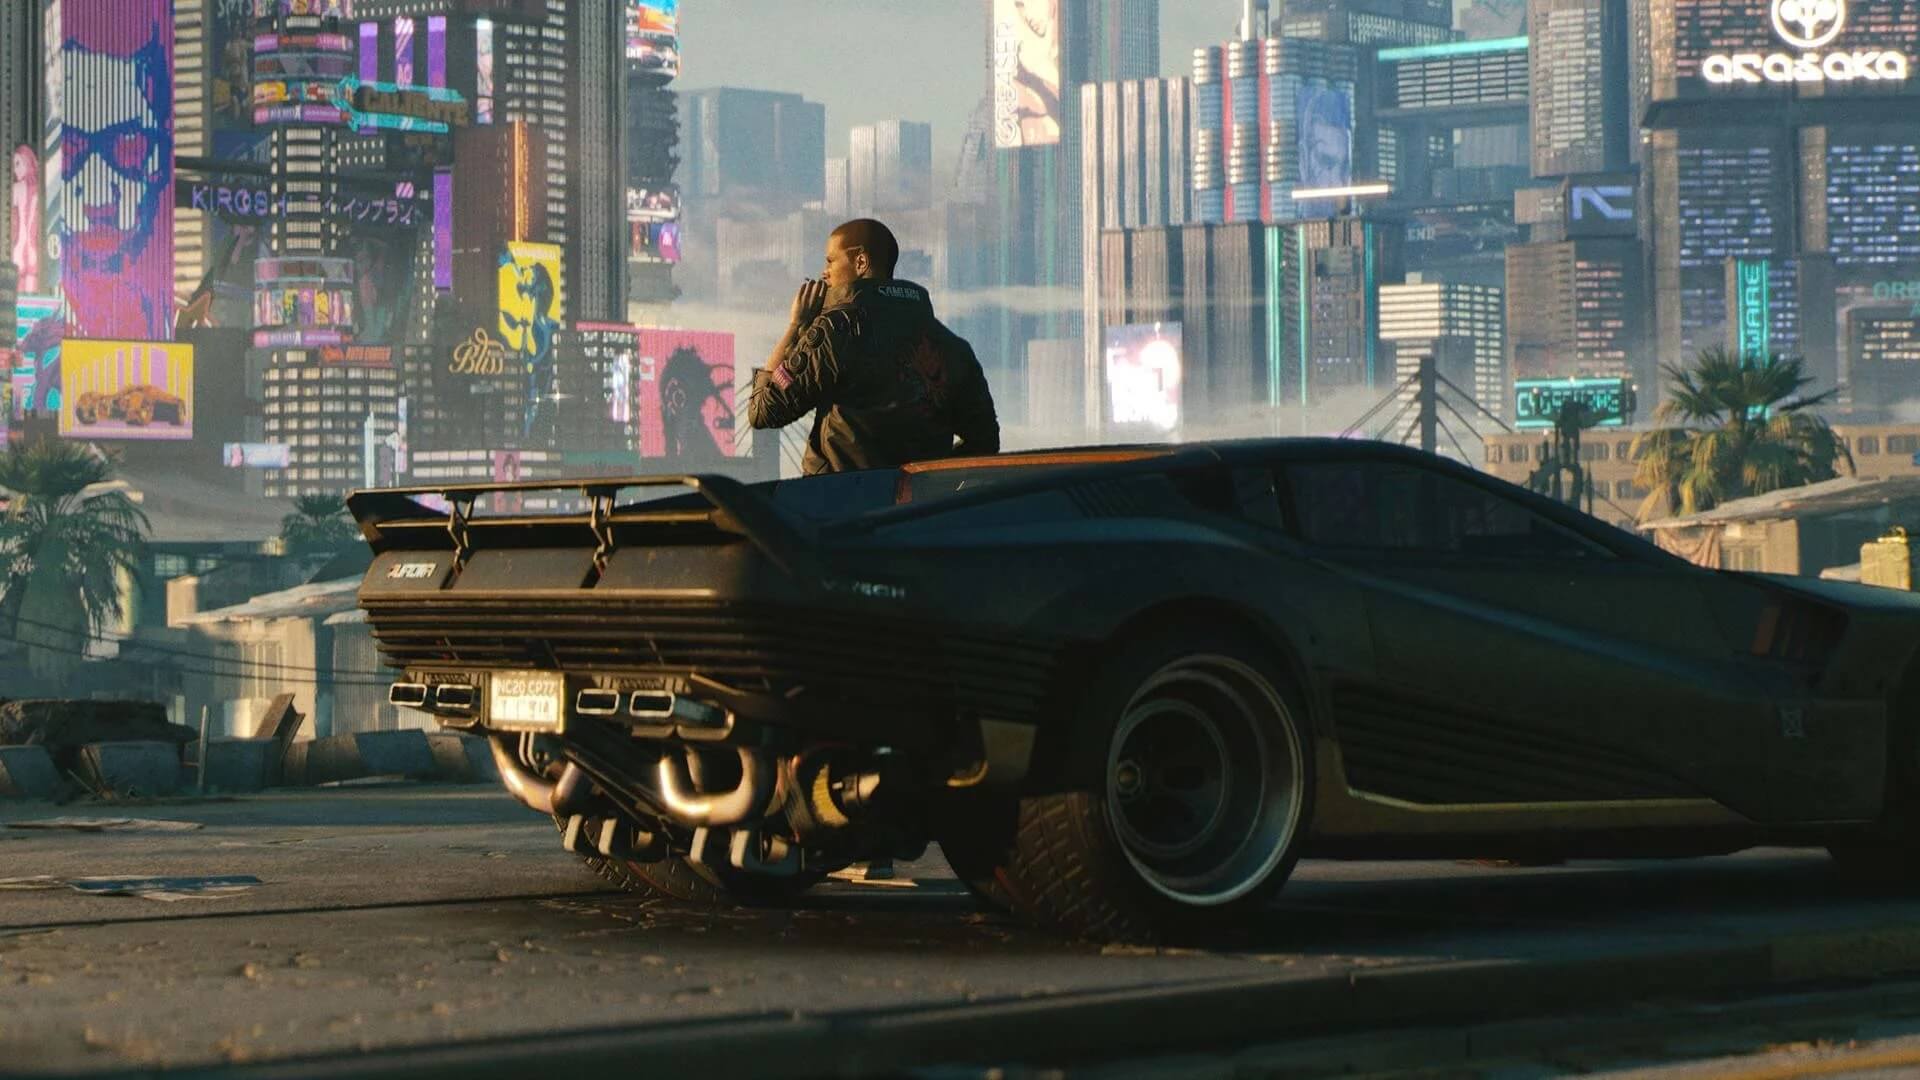 Cyberpunk 2077 met with second delay, release set for November